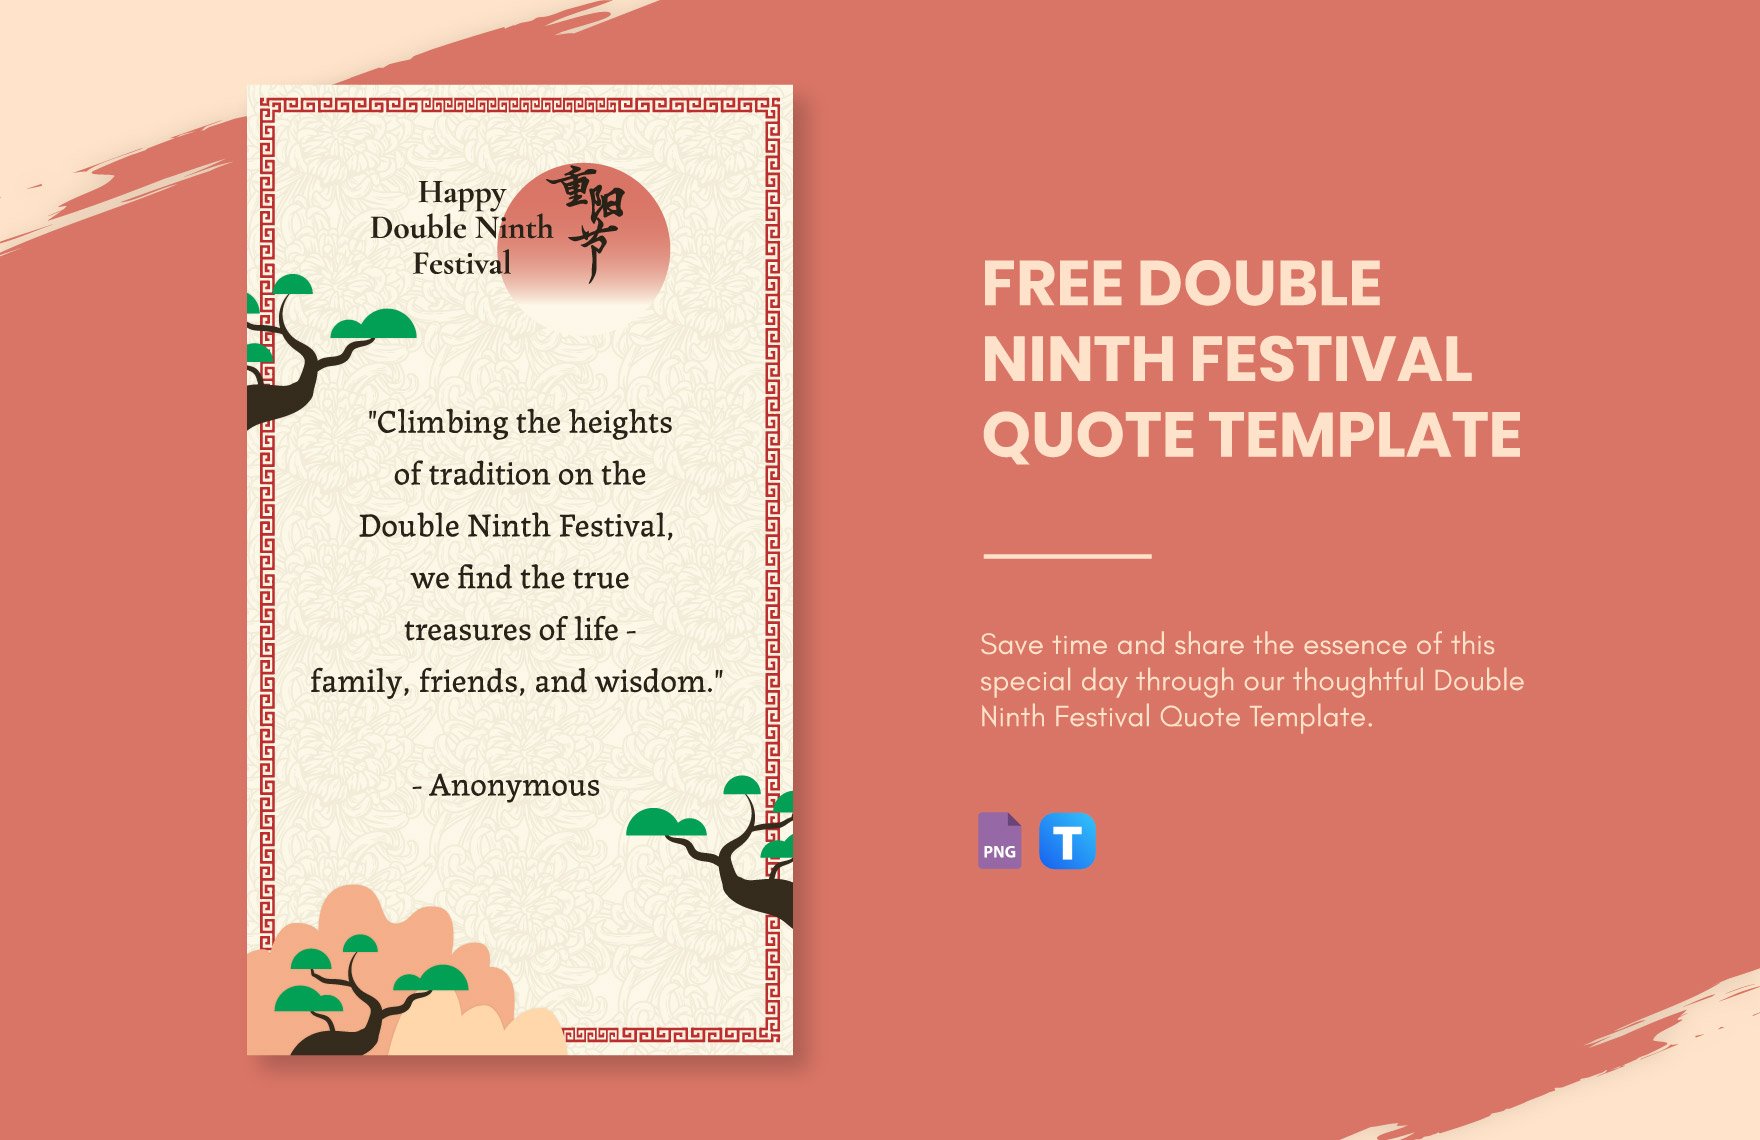 Free Double Ninth Festival Quote in PNG